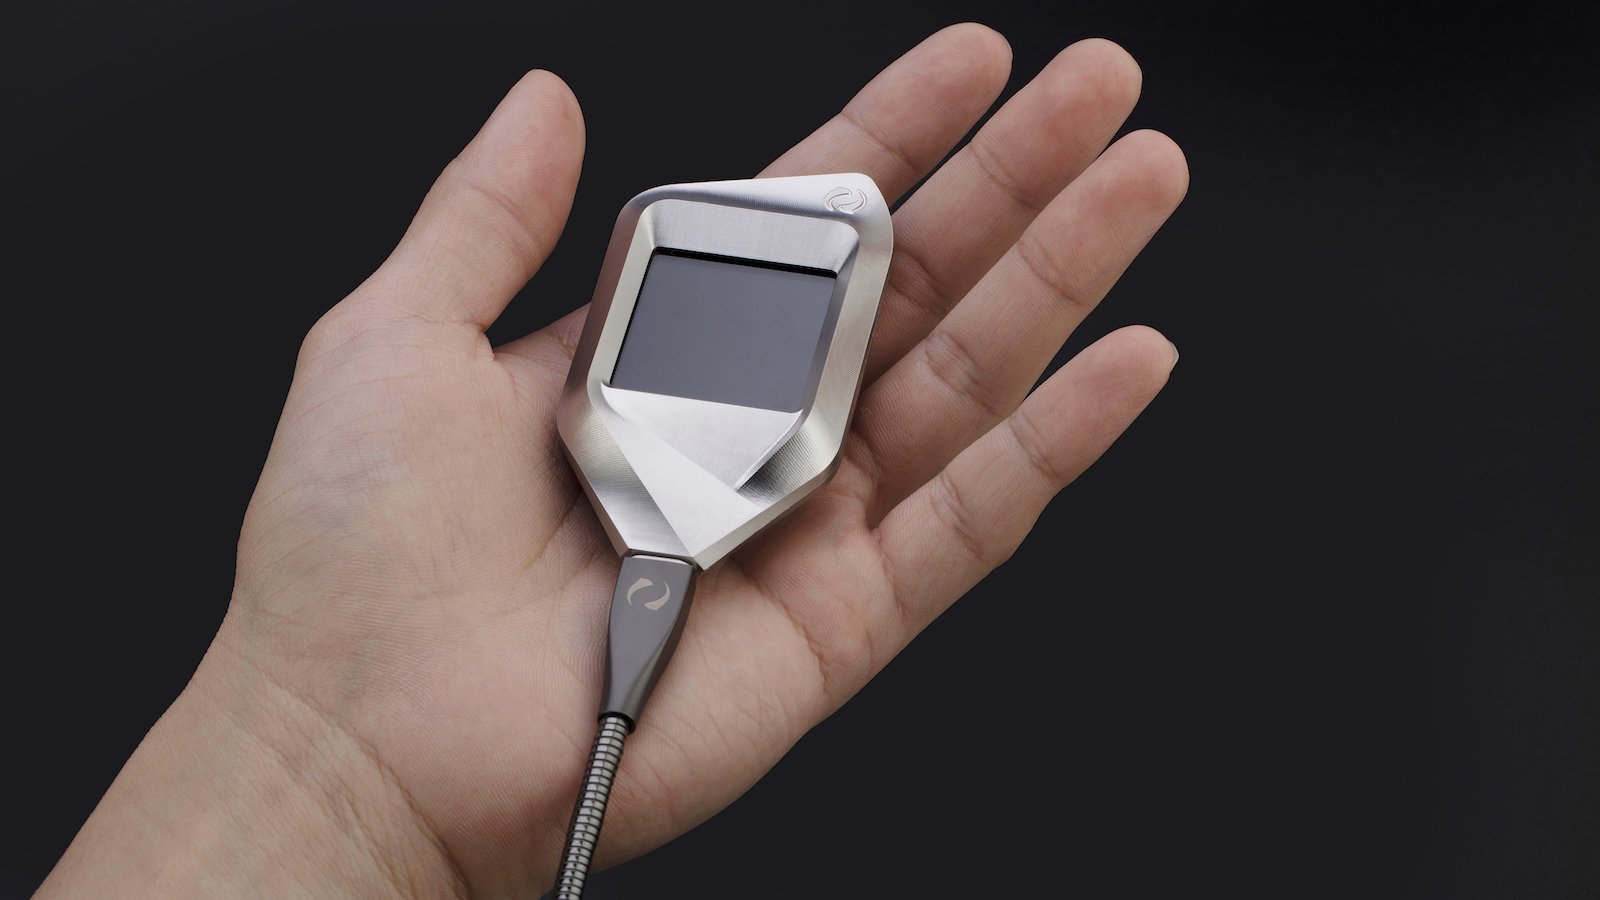 GRAY CORAZON crypto and bitcoin hardware wallet features Trezor firmware for security